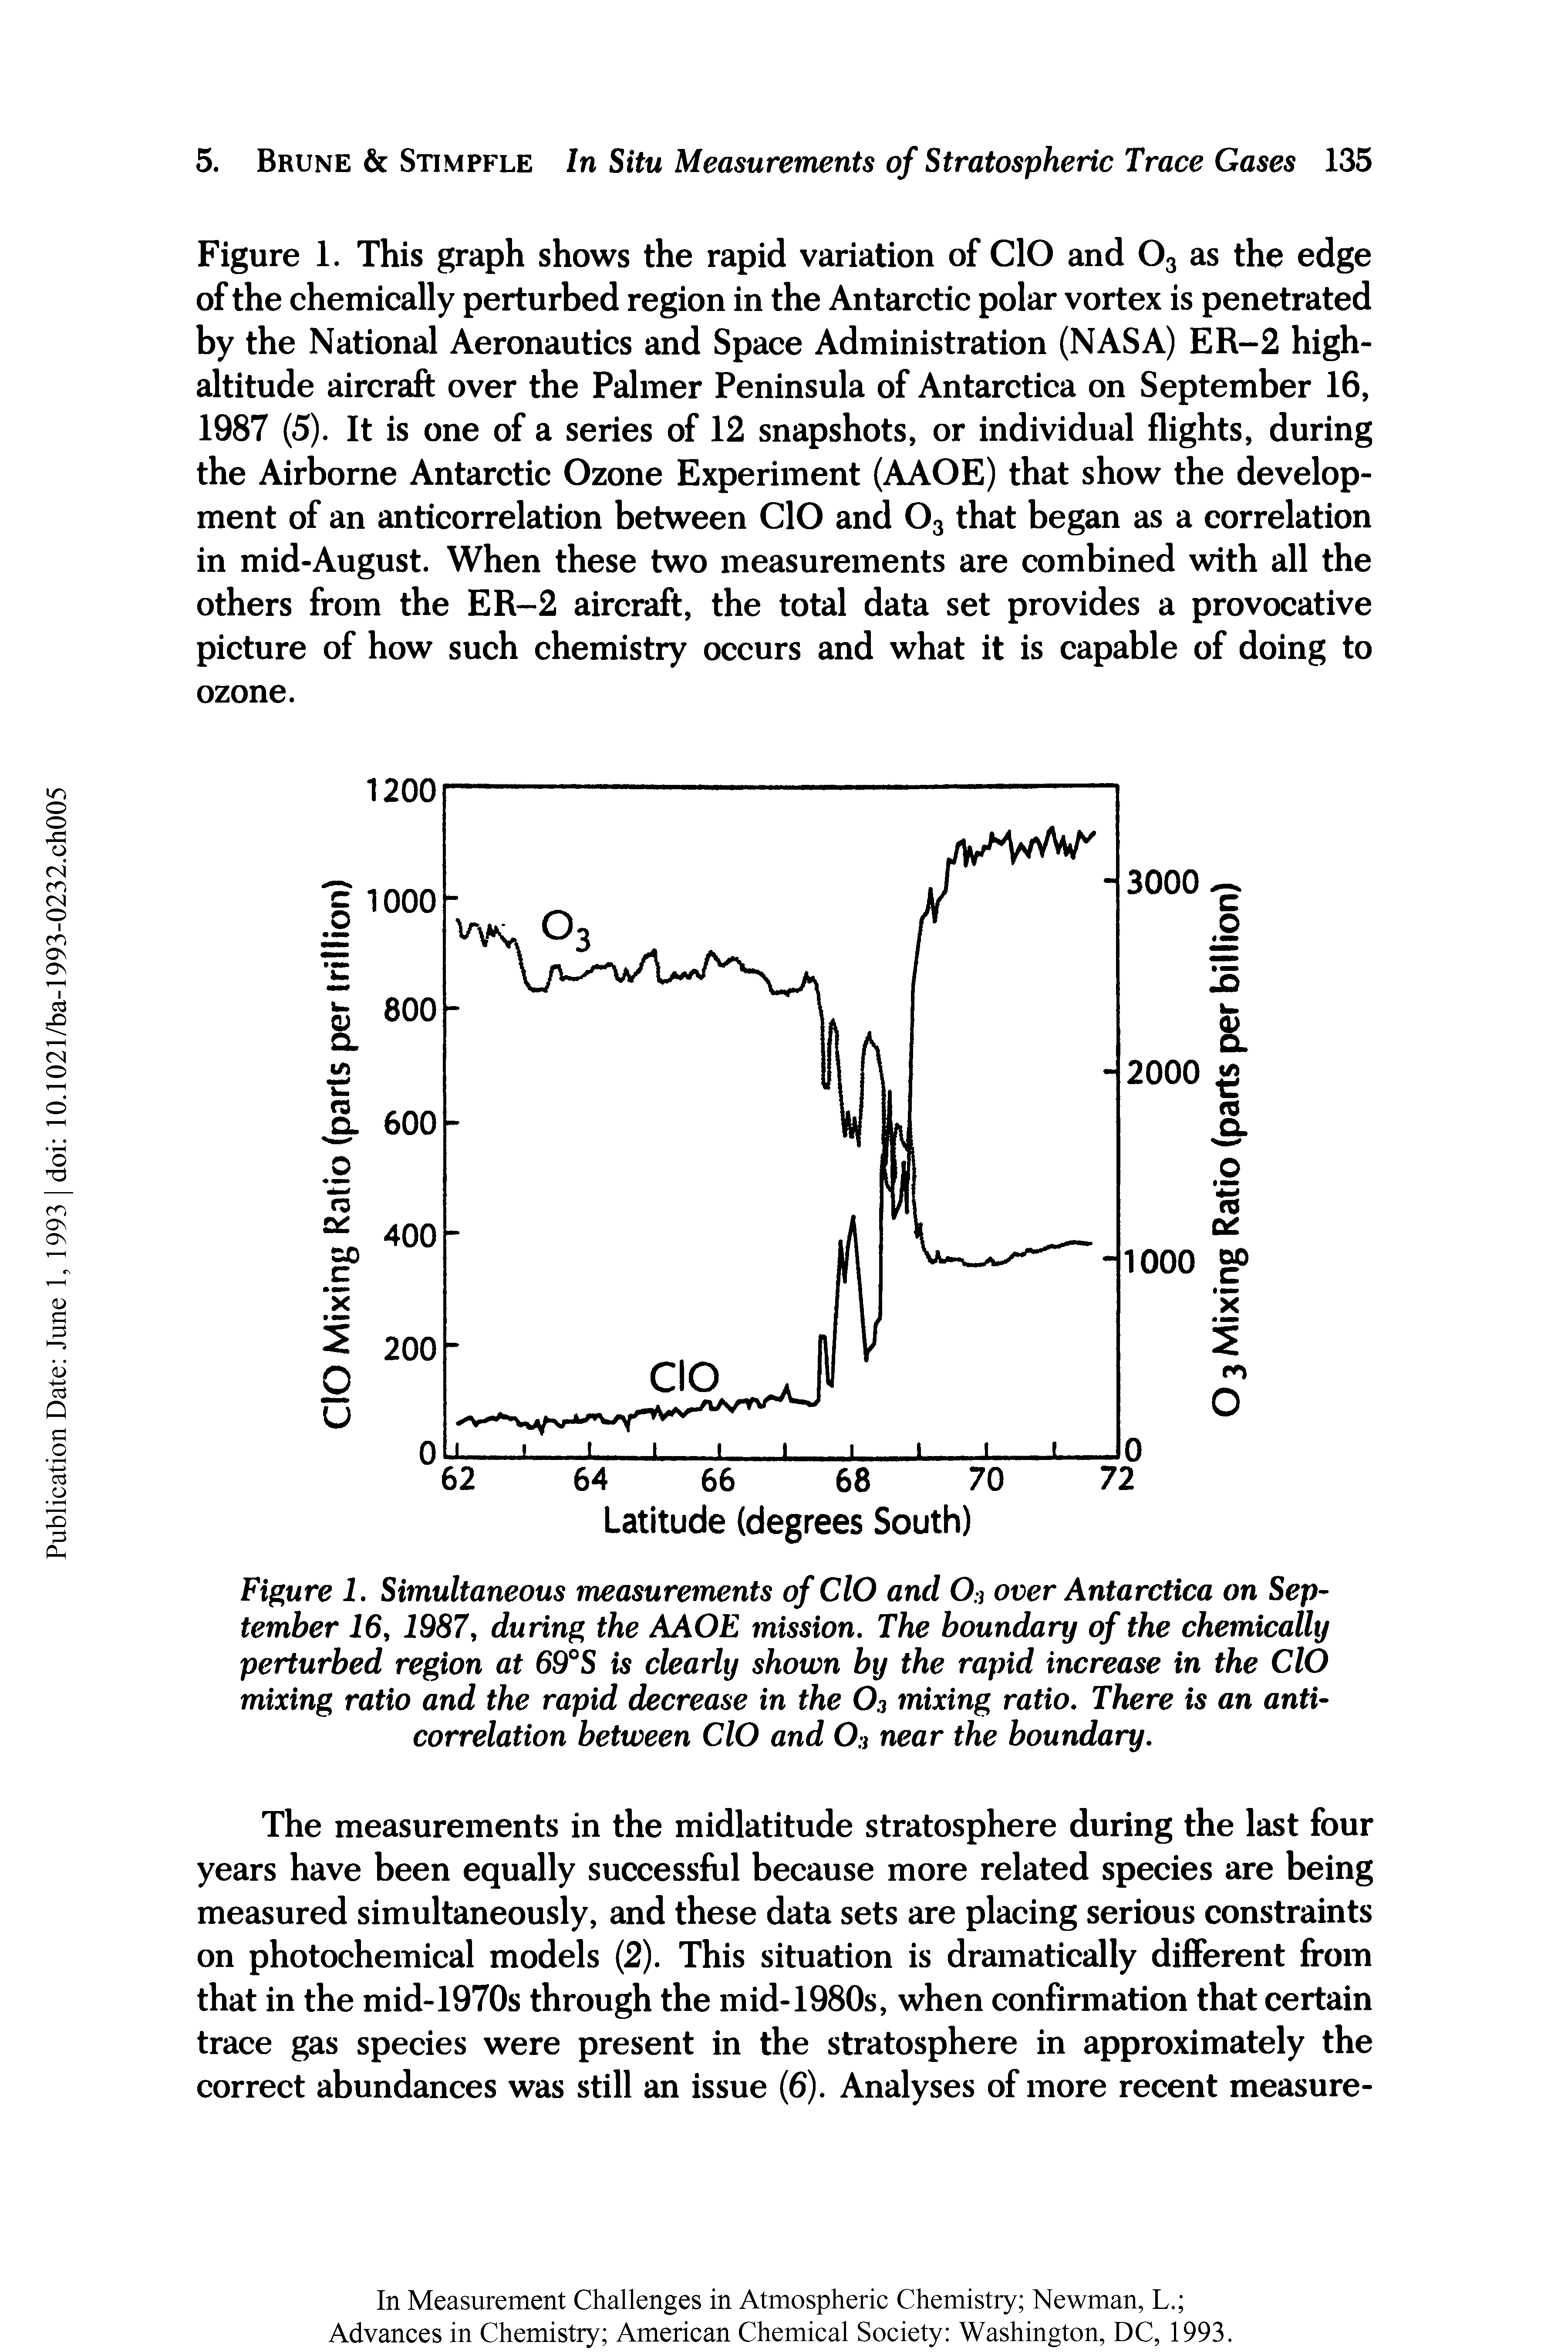 Figure 1. This graph shows the rapid variation of CIO and 03 as the edge of the chemically perturbed region in the Antarctic polar vortex is penetrated by the National Aeronautics and Space Administration (NASA) ER-2 high-altitude aircraft over the Palmer Peninsula of Antarctica on September 16, 1987 (5). It is one of a series of 12 snapshots, or individual flights, during the Airborne Antarctic Ozone Experiment (AAOE) that show the development of an anticorrelation between CIO and 03 that began as a correlation in mid-August. When these two measurements are combined with all the others from the ER-2 aircraft, the total data set provides a provocative picture of how such chemistry occurs and what it is capable of doing to ozone.